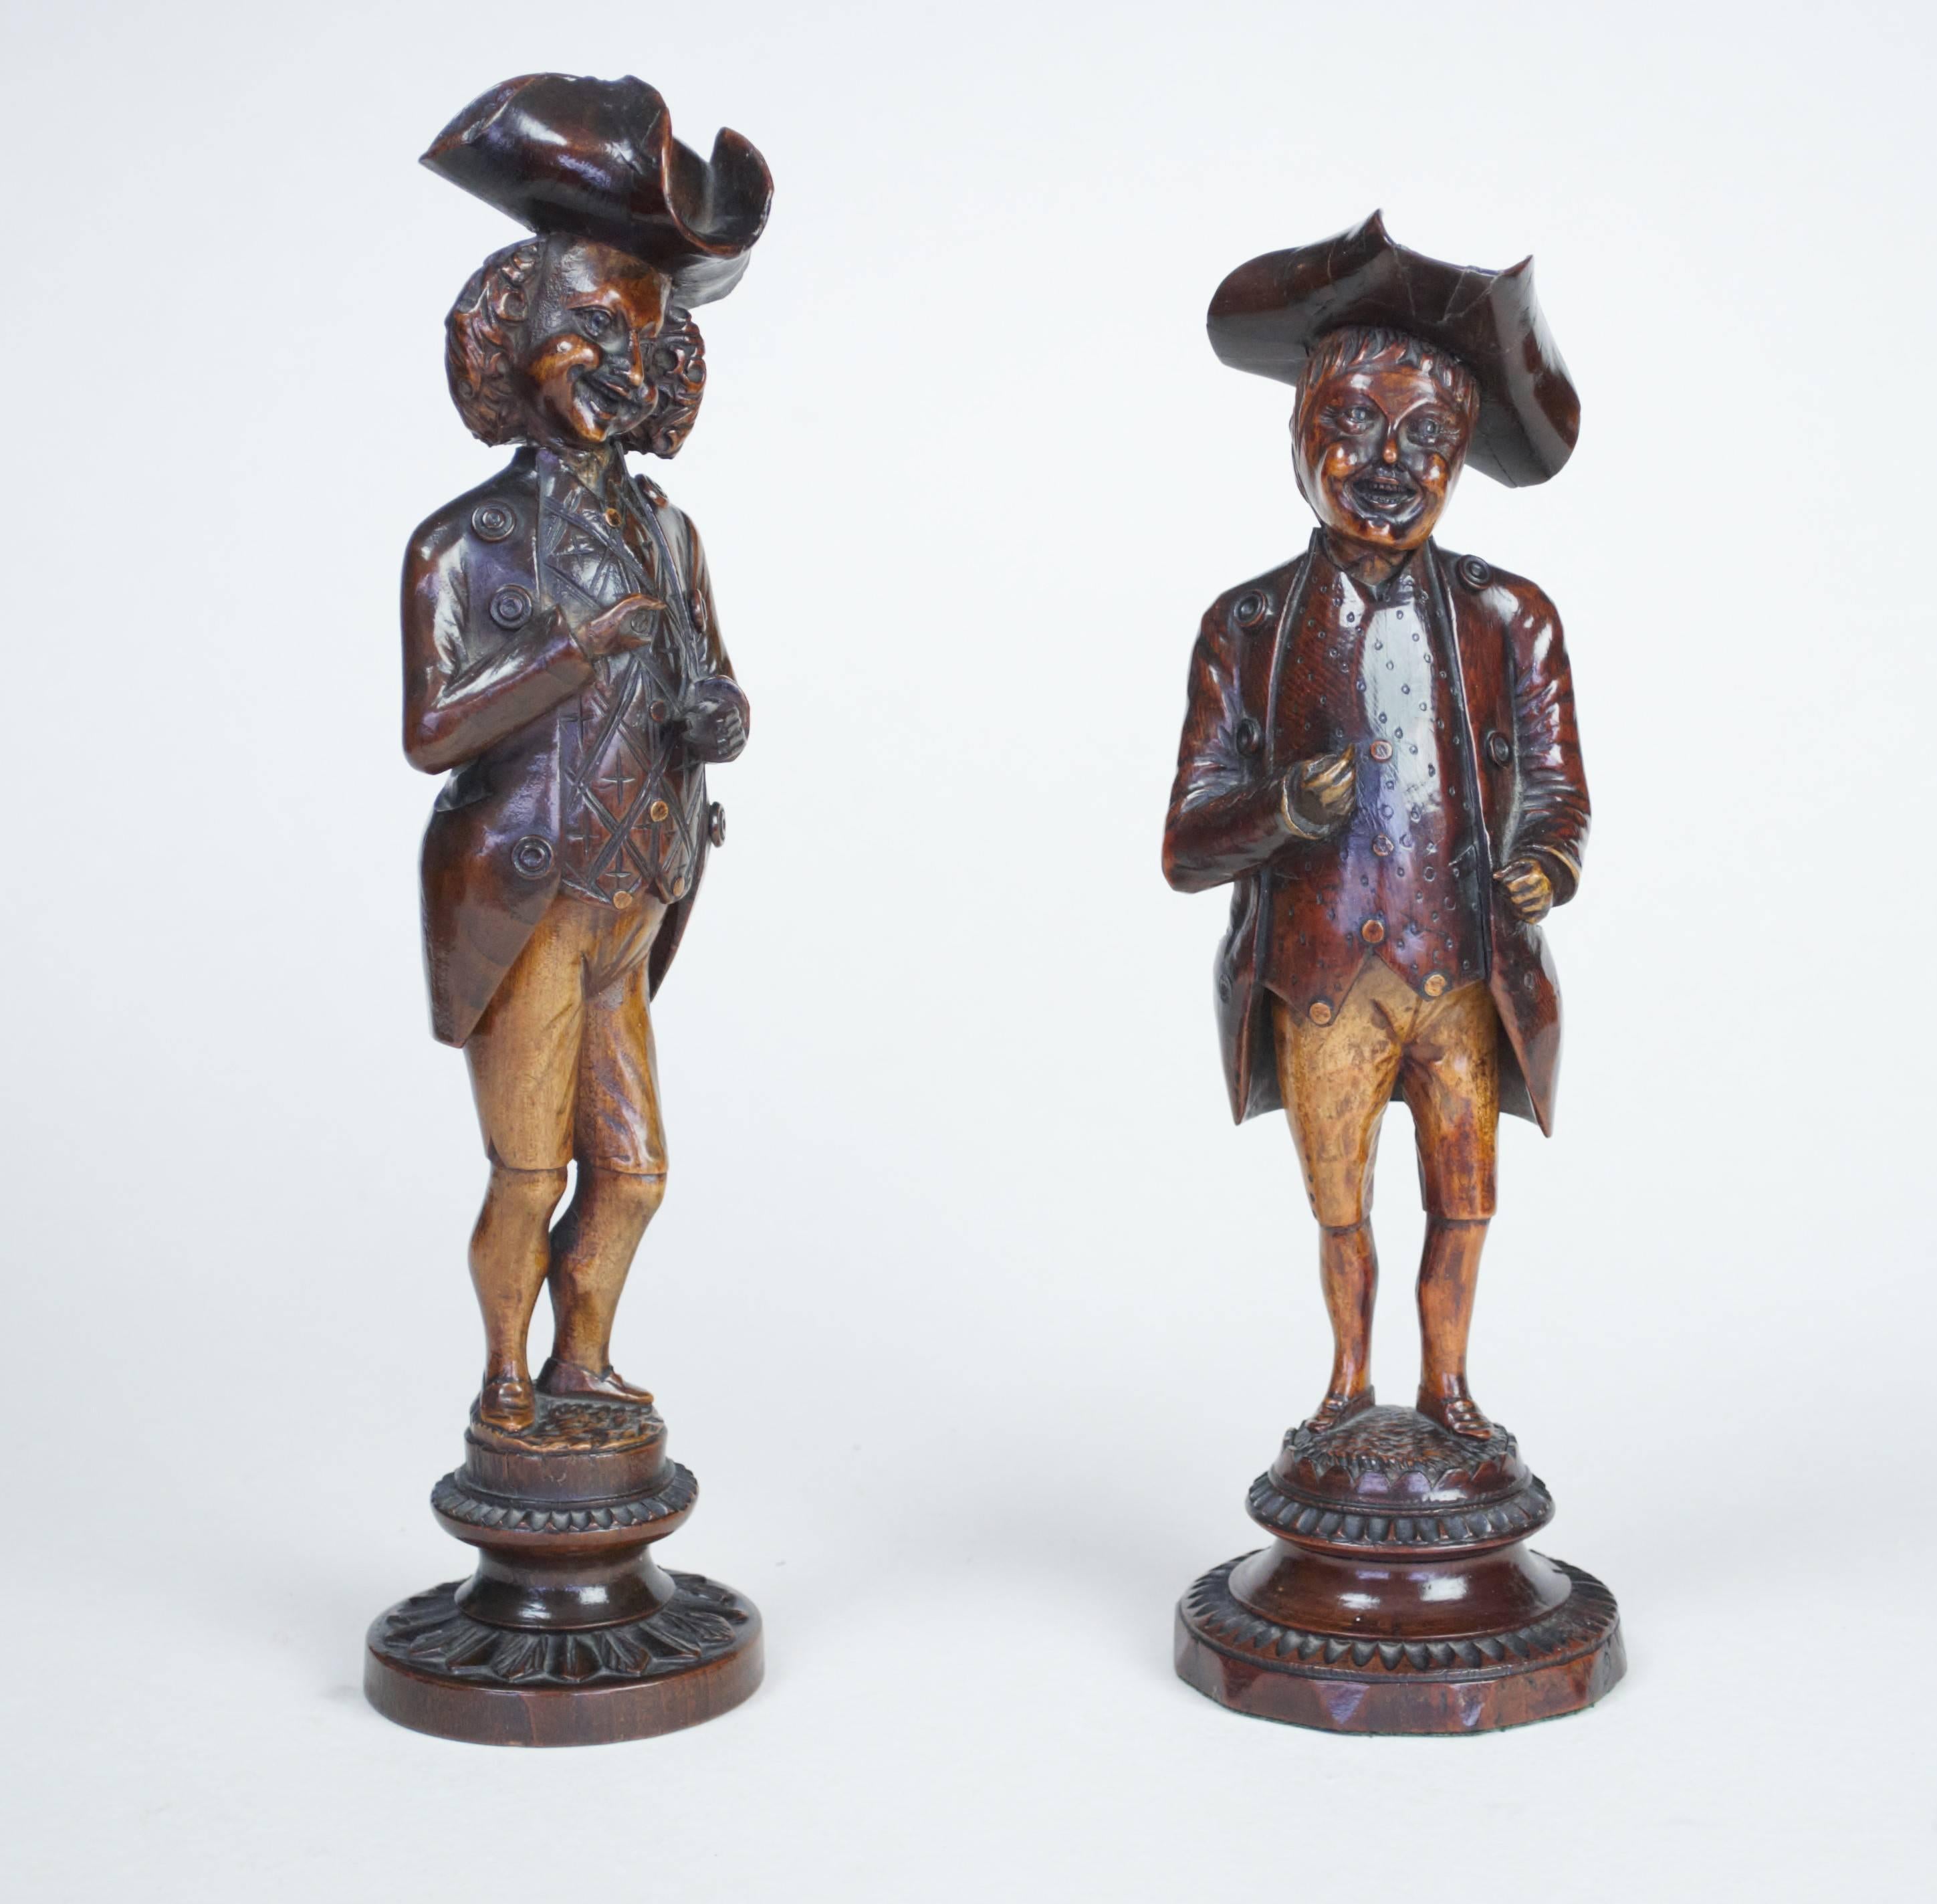 Very fine and rare pair of treen nutcrackers, carved in the form of caricatures of country gents. Probably German or Dutch, early 19th century.
Very good colour and pagination.